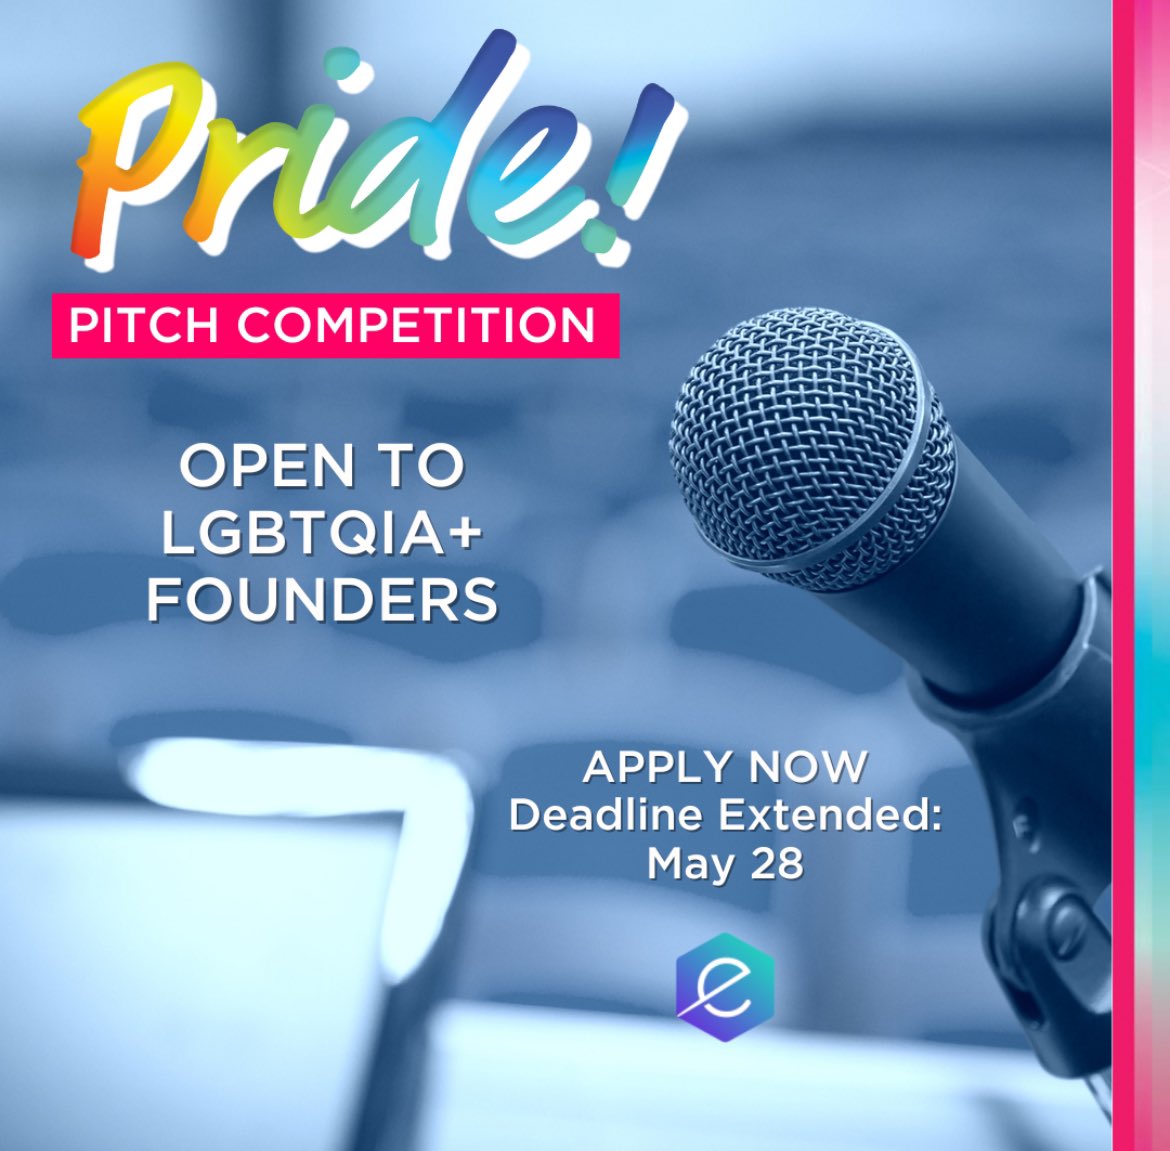 🚨DEADLINE EXTENDED to apply for the #eMergeAmericas PRIDE! pitch competition. This competition exclusively for #LGBTQIA+ #founders of early-stage #startups and is a fantastic opportunity to showcase your #innovative startup. To qualify, at least one member of your founding team